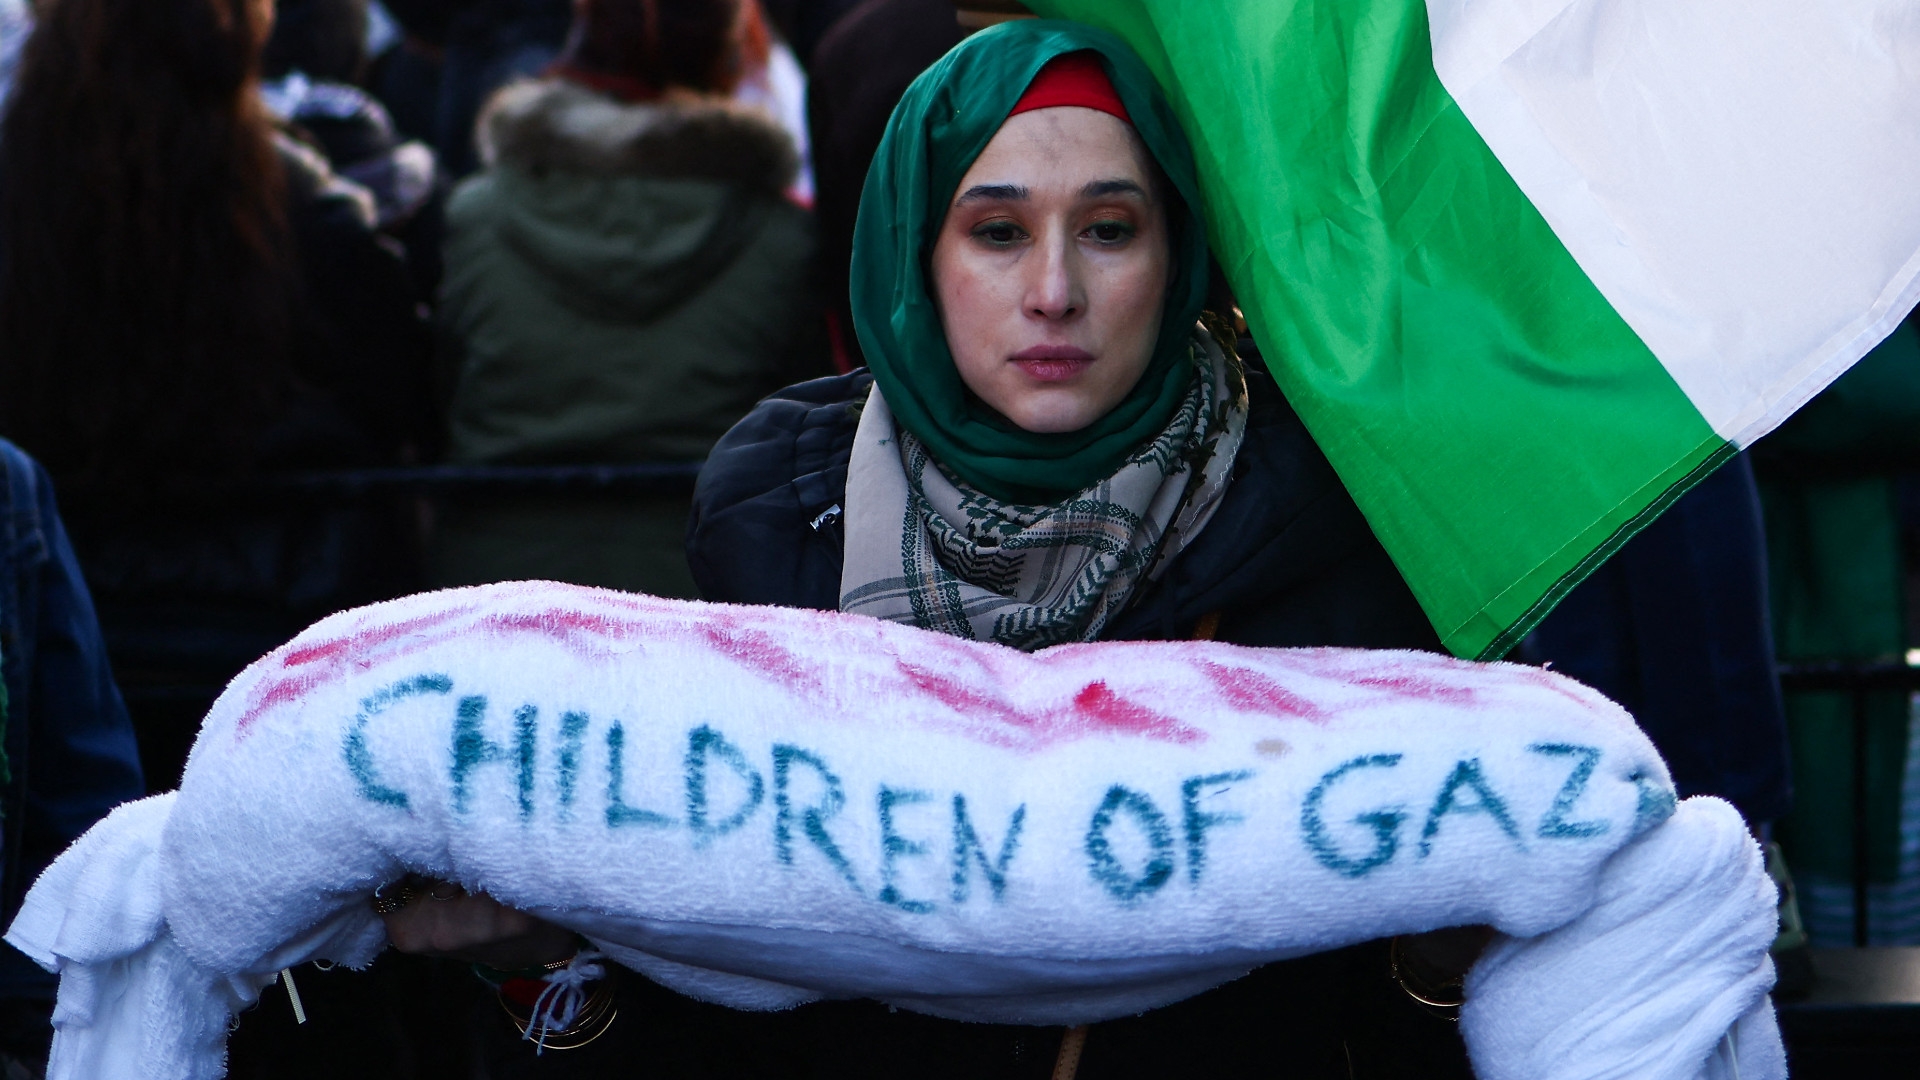 A protester holds a symbolic shrouded, deceased Palestinian child while attending a march calling for a ceasefire in Gaza, in central London on 9 December 2023 (Henry Nicholls/AFP)